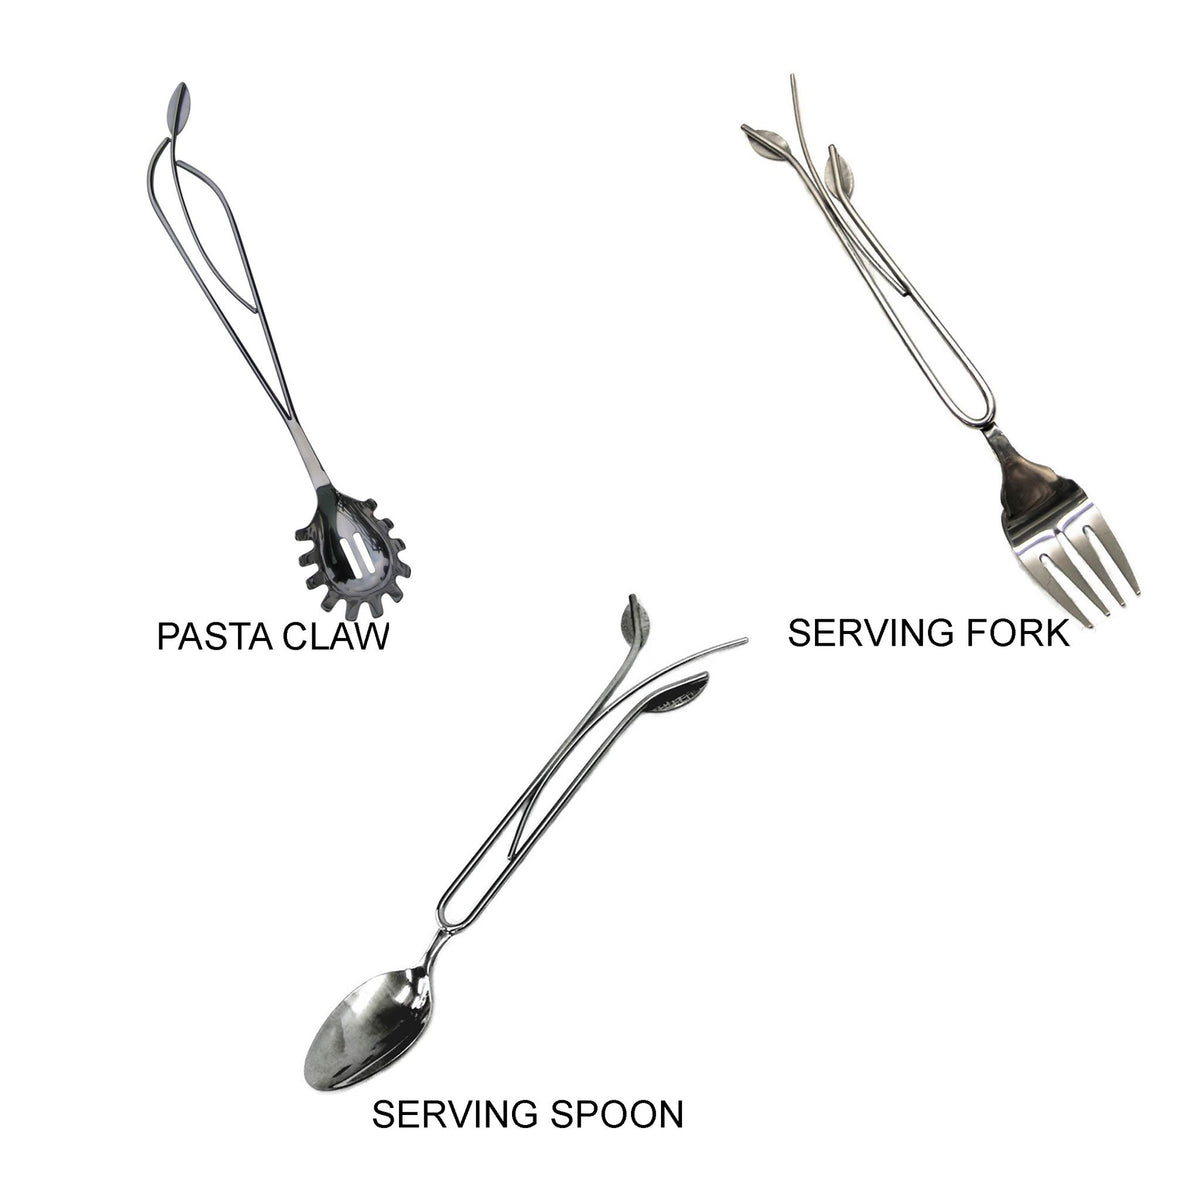 http://www.sweetheartgallery.com/cdn/shop/products/Metallic-Evolution-Stainless-Steel-Kitchen-and-Serving-Utensils-Set-Pasta-Claw-and-Seving-Fork-Serving-Spoon-3-Artisan-Crafted-Servingware_1200x1200.jpg?v=1587767679